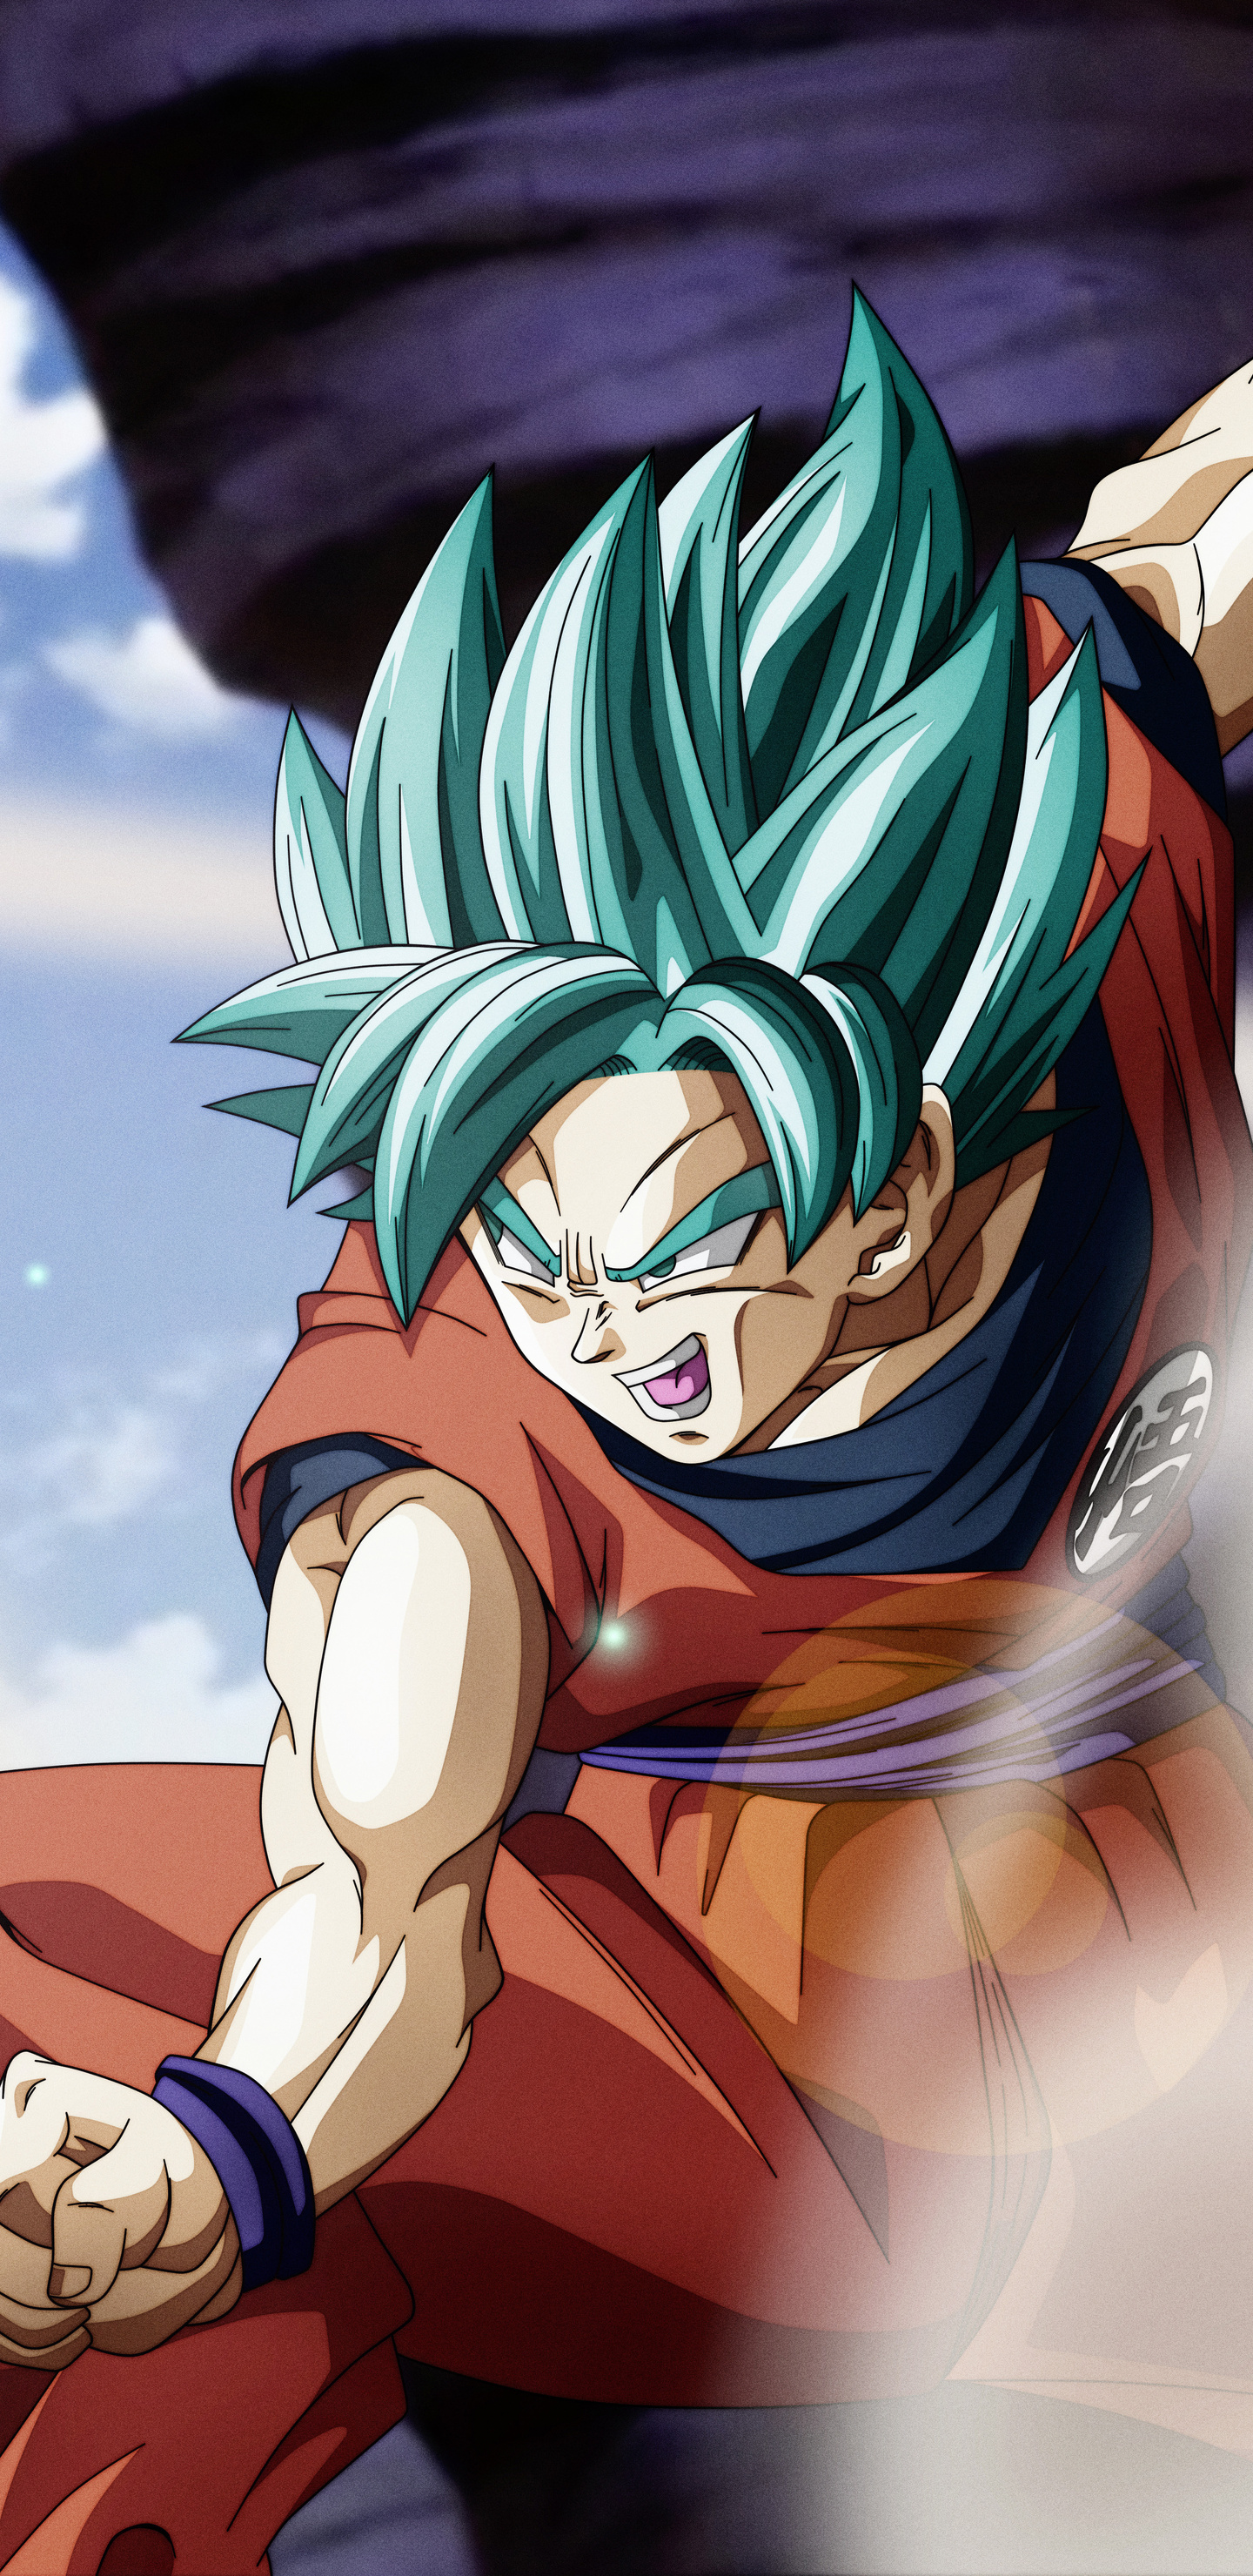 1440x2960 Goku Super Saiyan Blue Samsung Galaxy Note 9,8, S9,S8,S8+ QHD HD  4k Wallpapers, Images, Backgrounds, Photos and Pictures